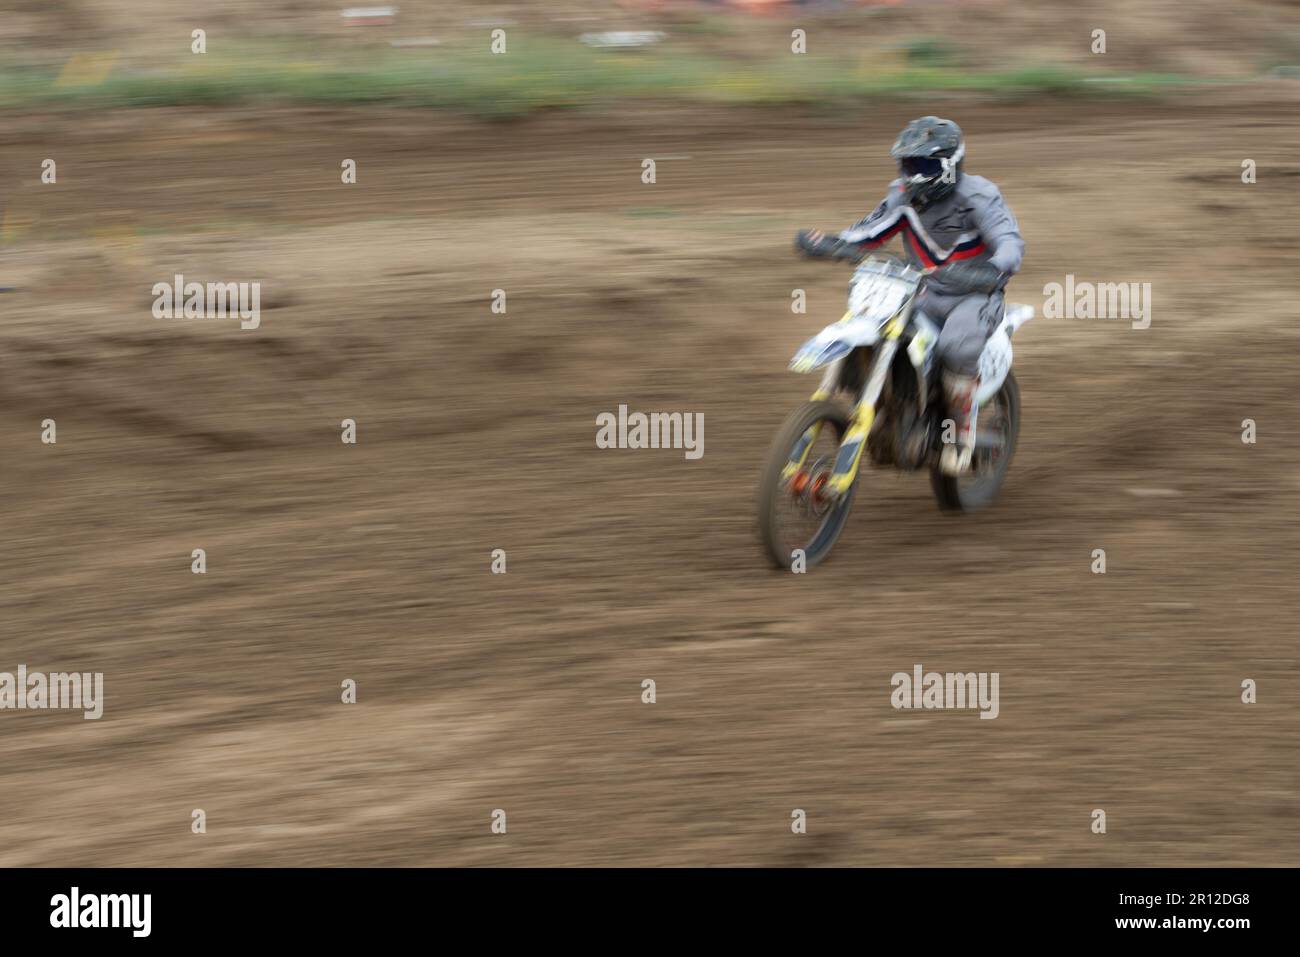 Unrecognized athlete riding a sports motorbike jumping on the air on a motocross race. Fast speed extreme sport. Stock Photo